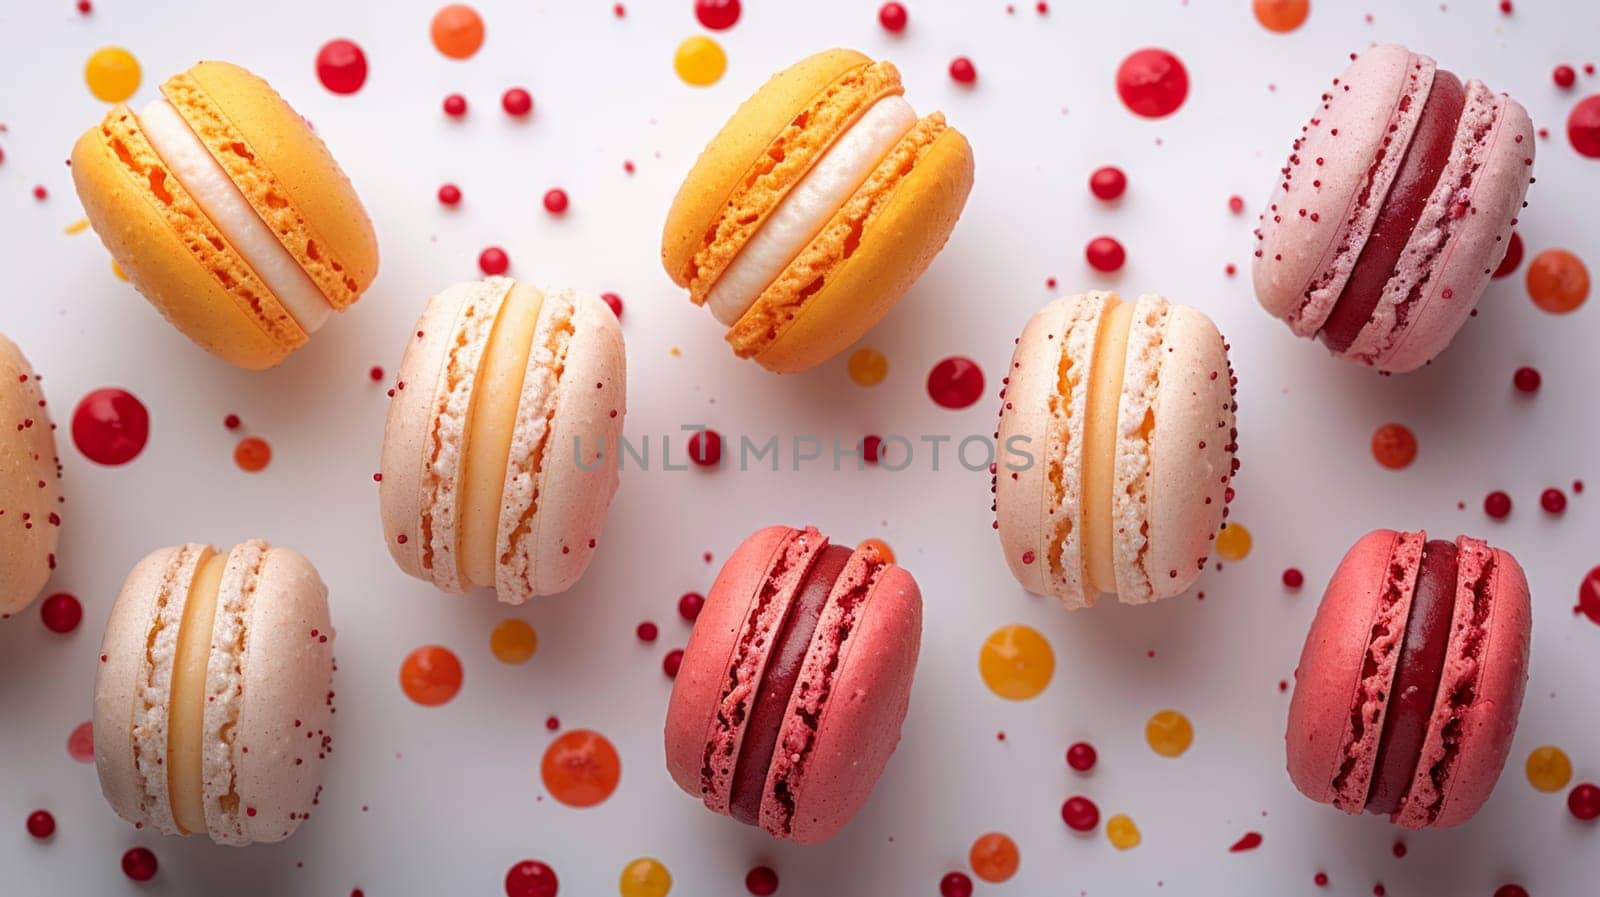 Macaroon in different colorful colors, creative layout. French chocolate macaroon cake on white background, top view.